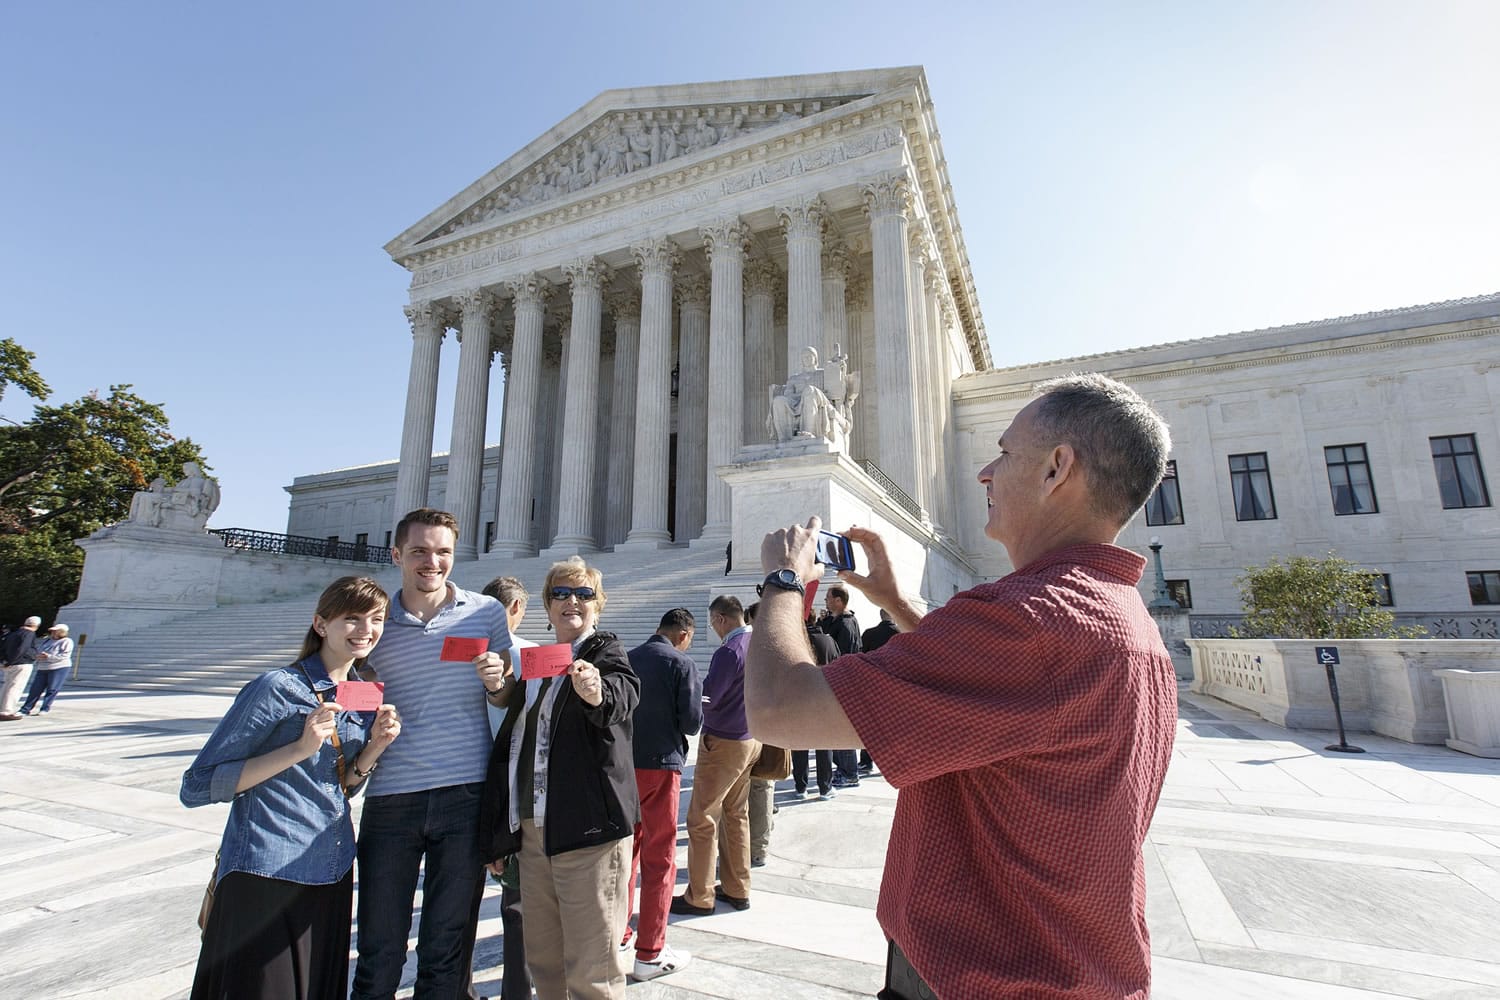 Stephen Kirby, right, takes a souvenir photo of his family holding visitor tickets as the Supreme Court begins its new term Oct.